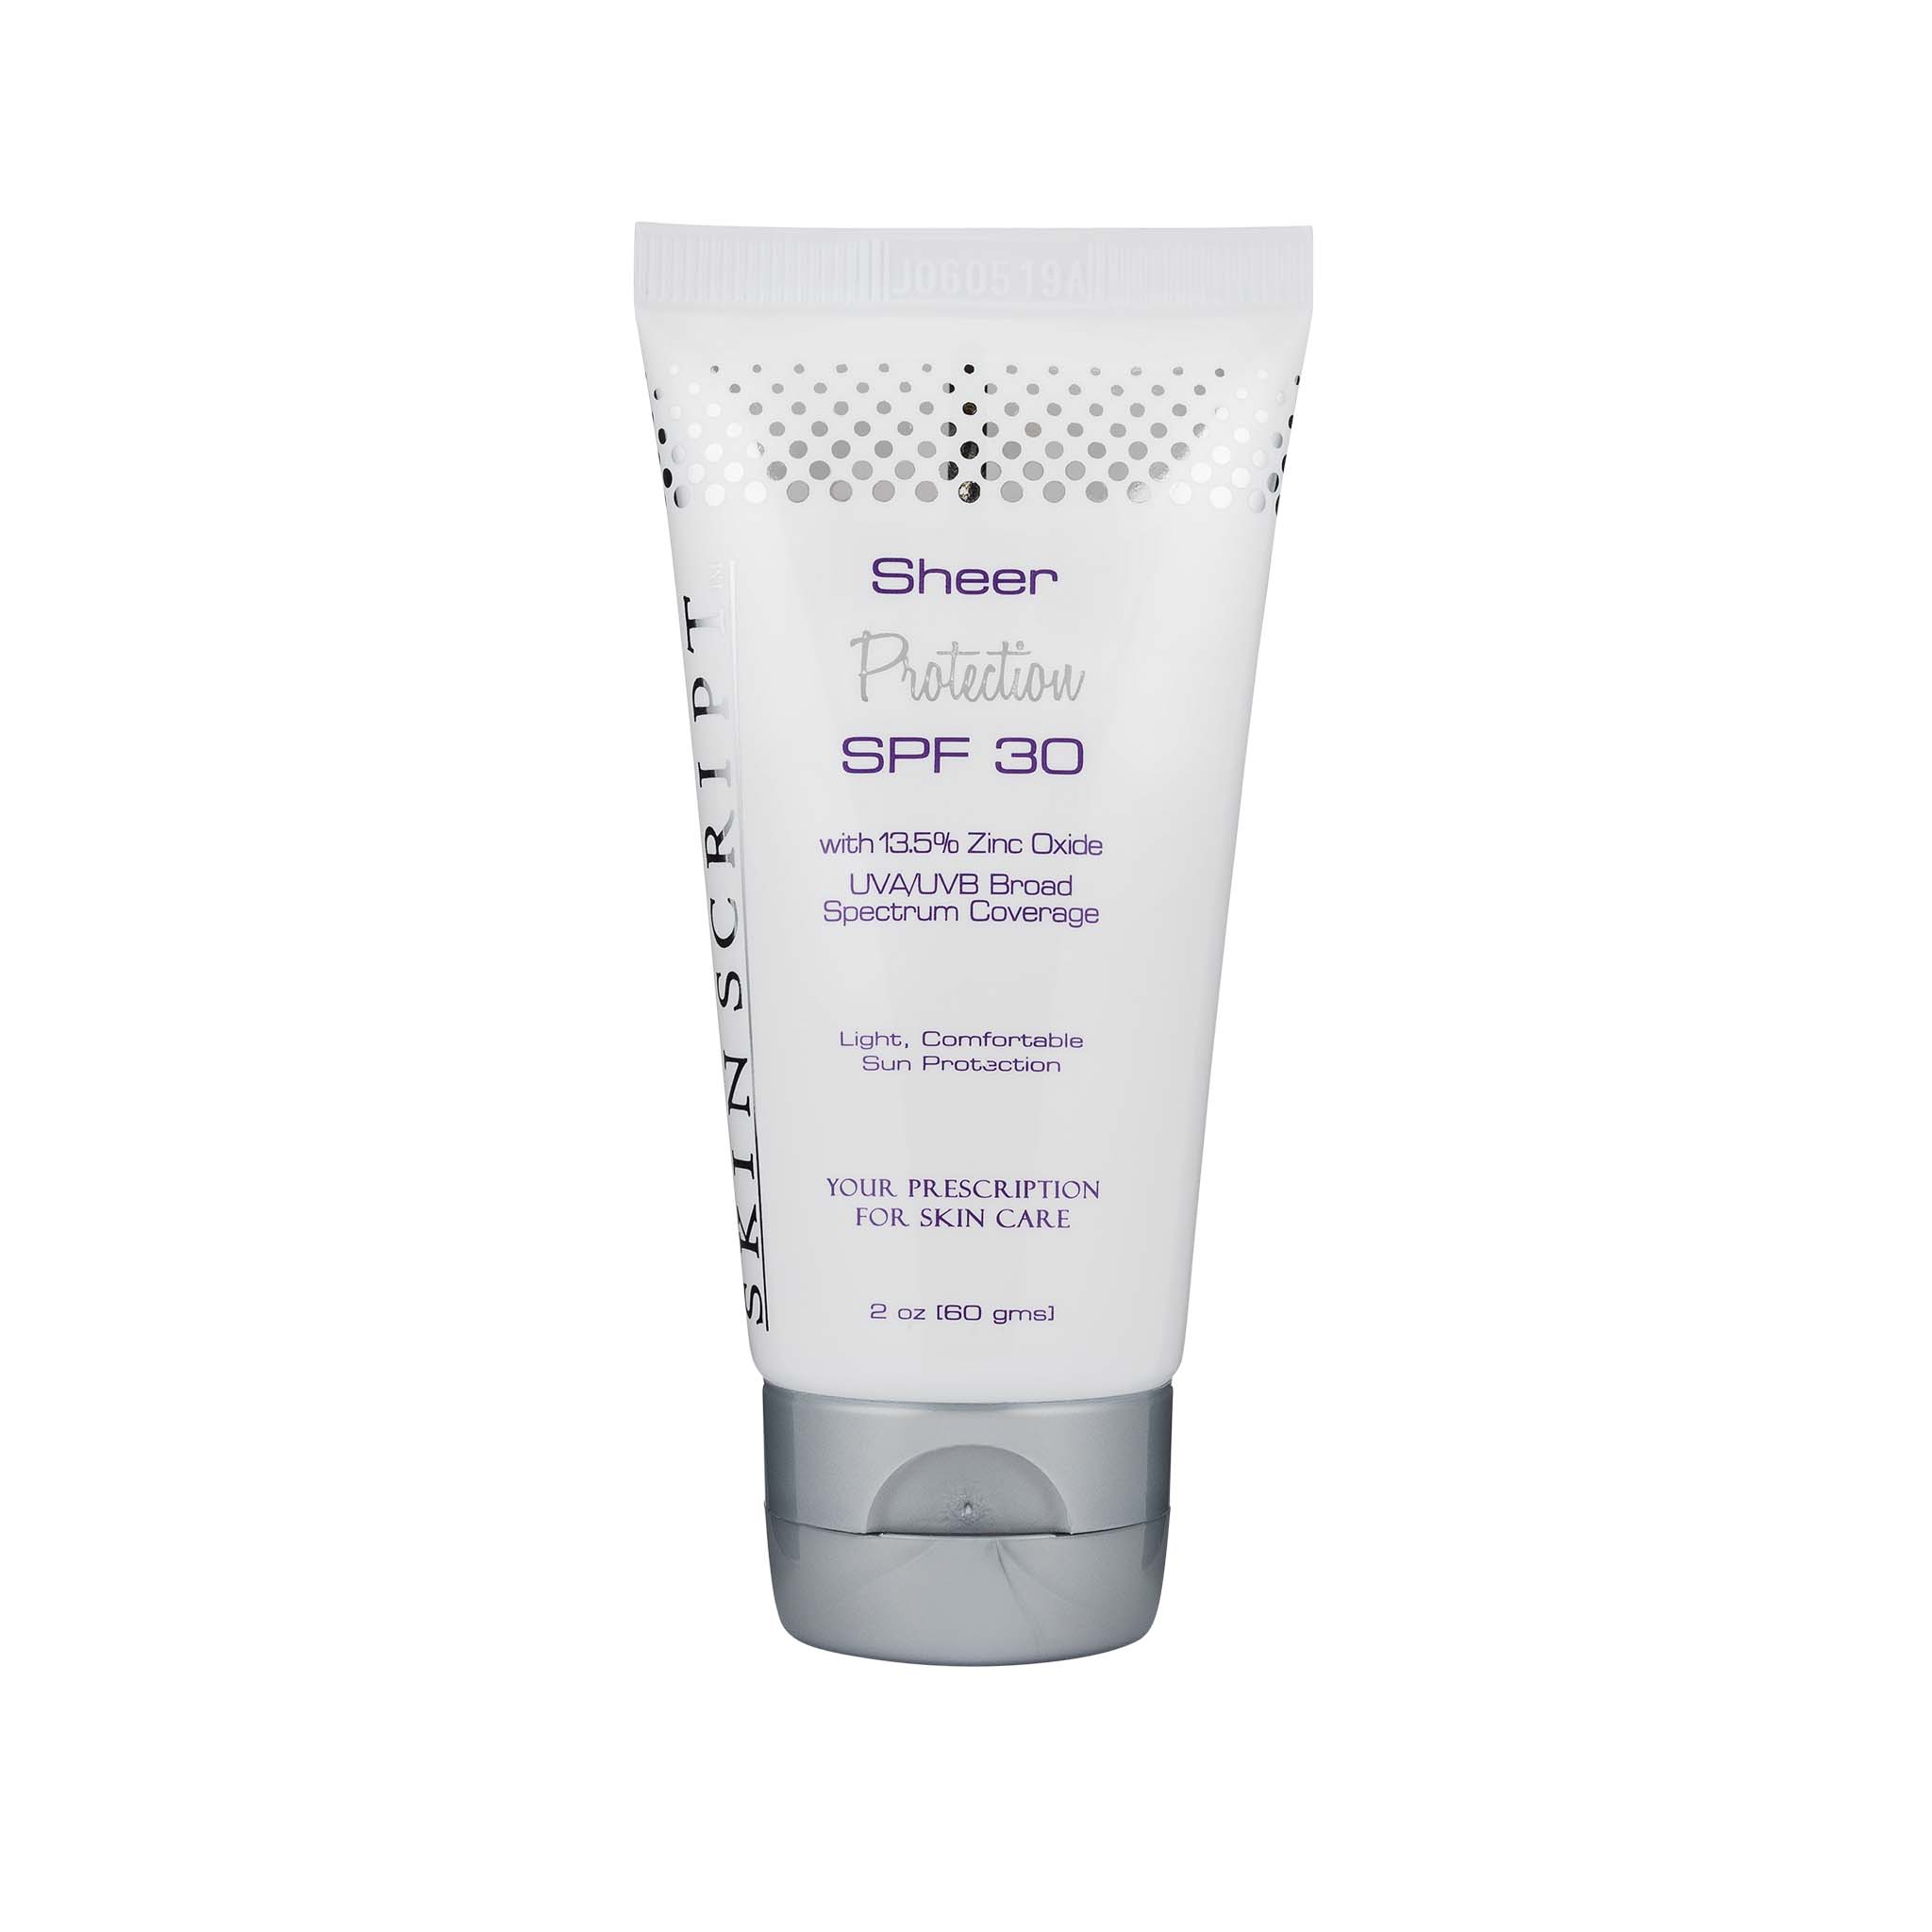 Skin Script Sheer Protection SPF 30 prevents sun burns and decreases premature aging caused by sun damage.